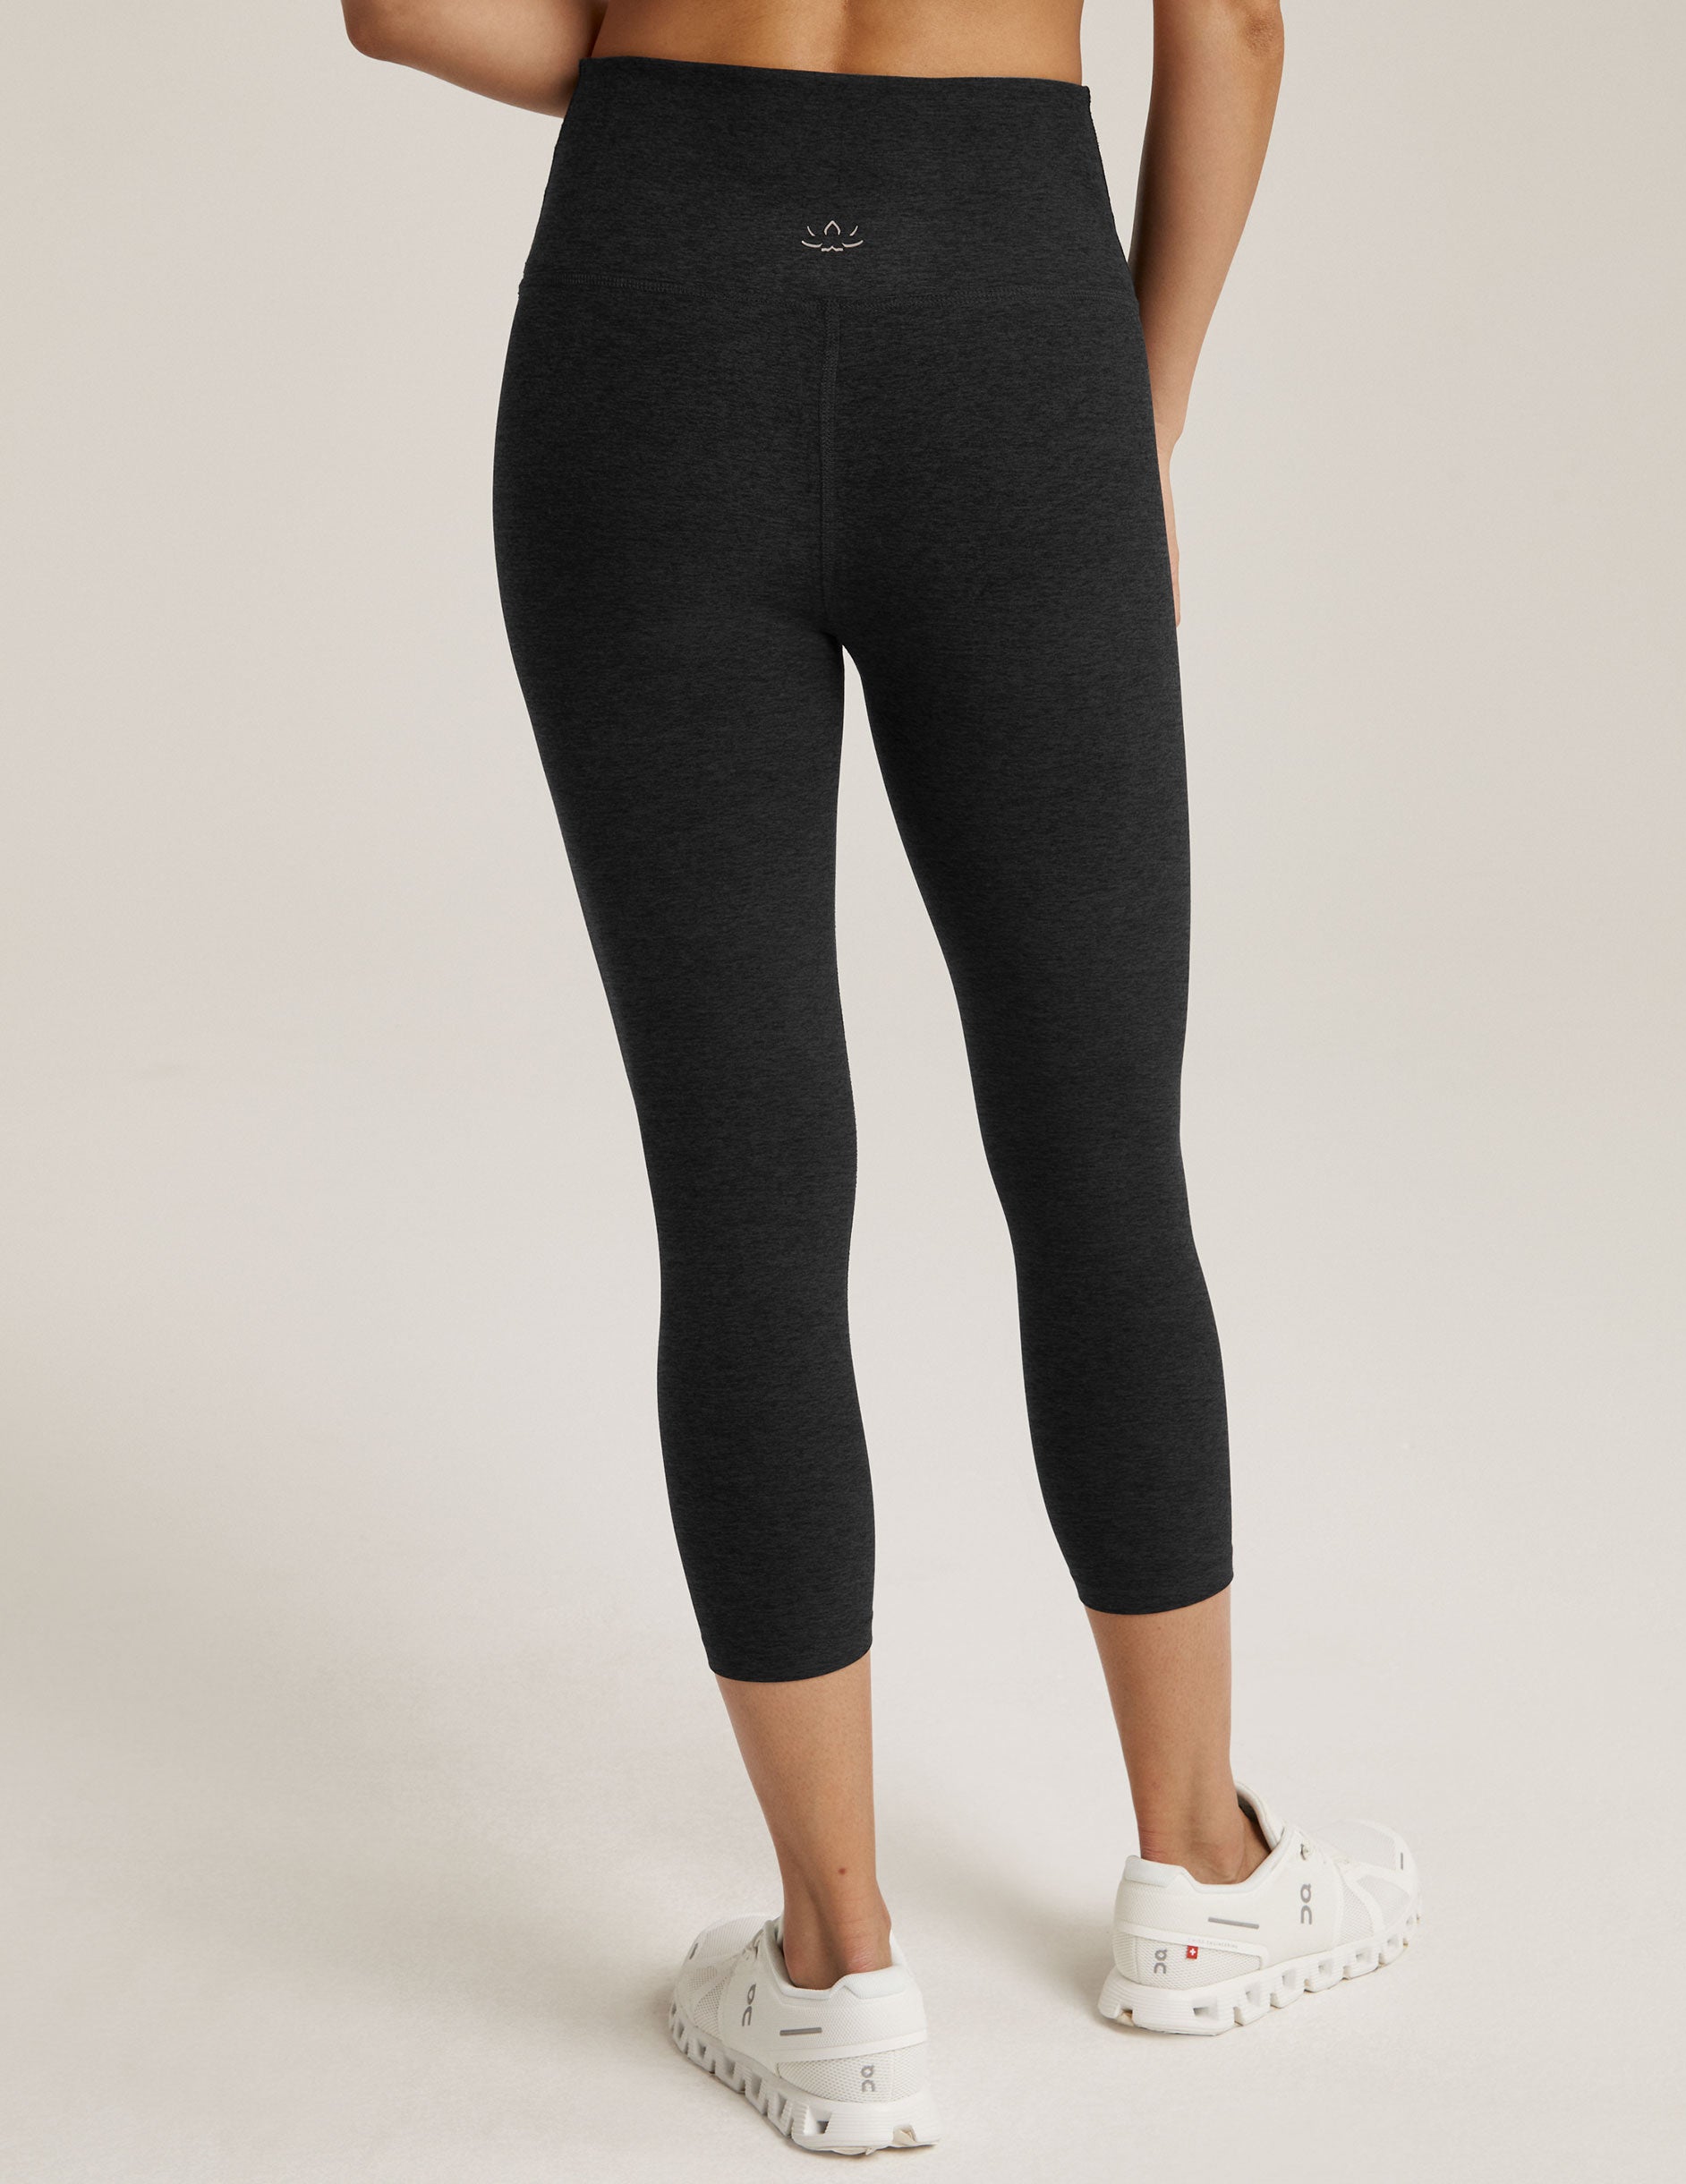 One Day At A Time Capri Leggings